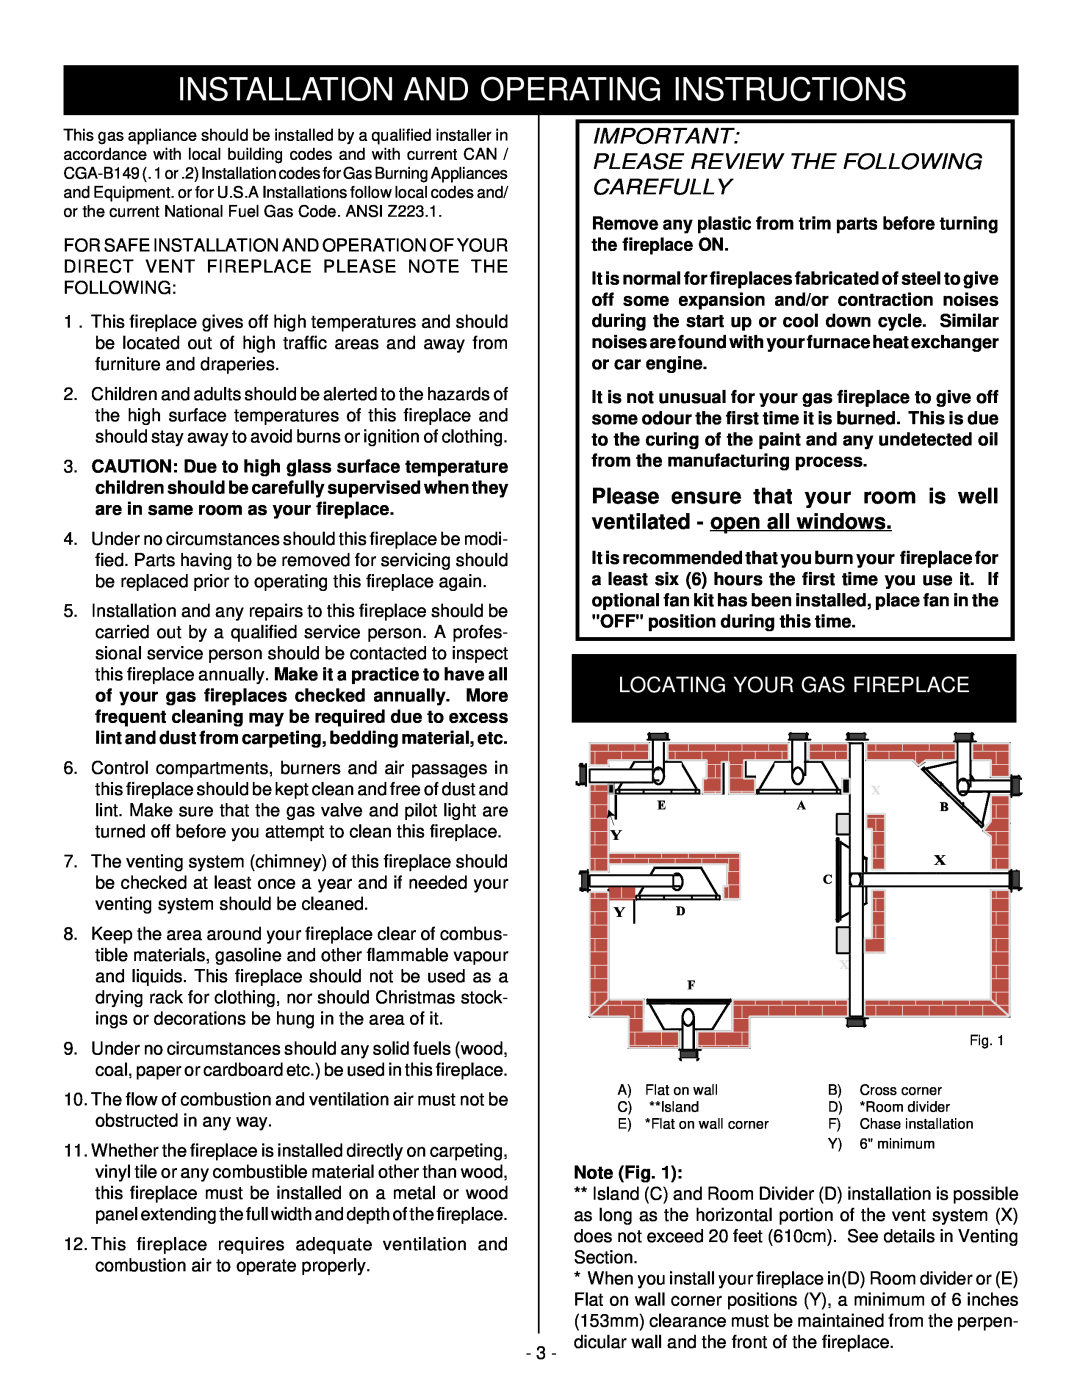 Vermont Casting BHDT36 Installation And Operating Instructions, Please ensure that your room is well, Carefully 